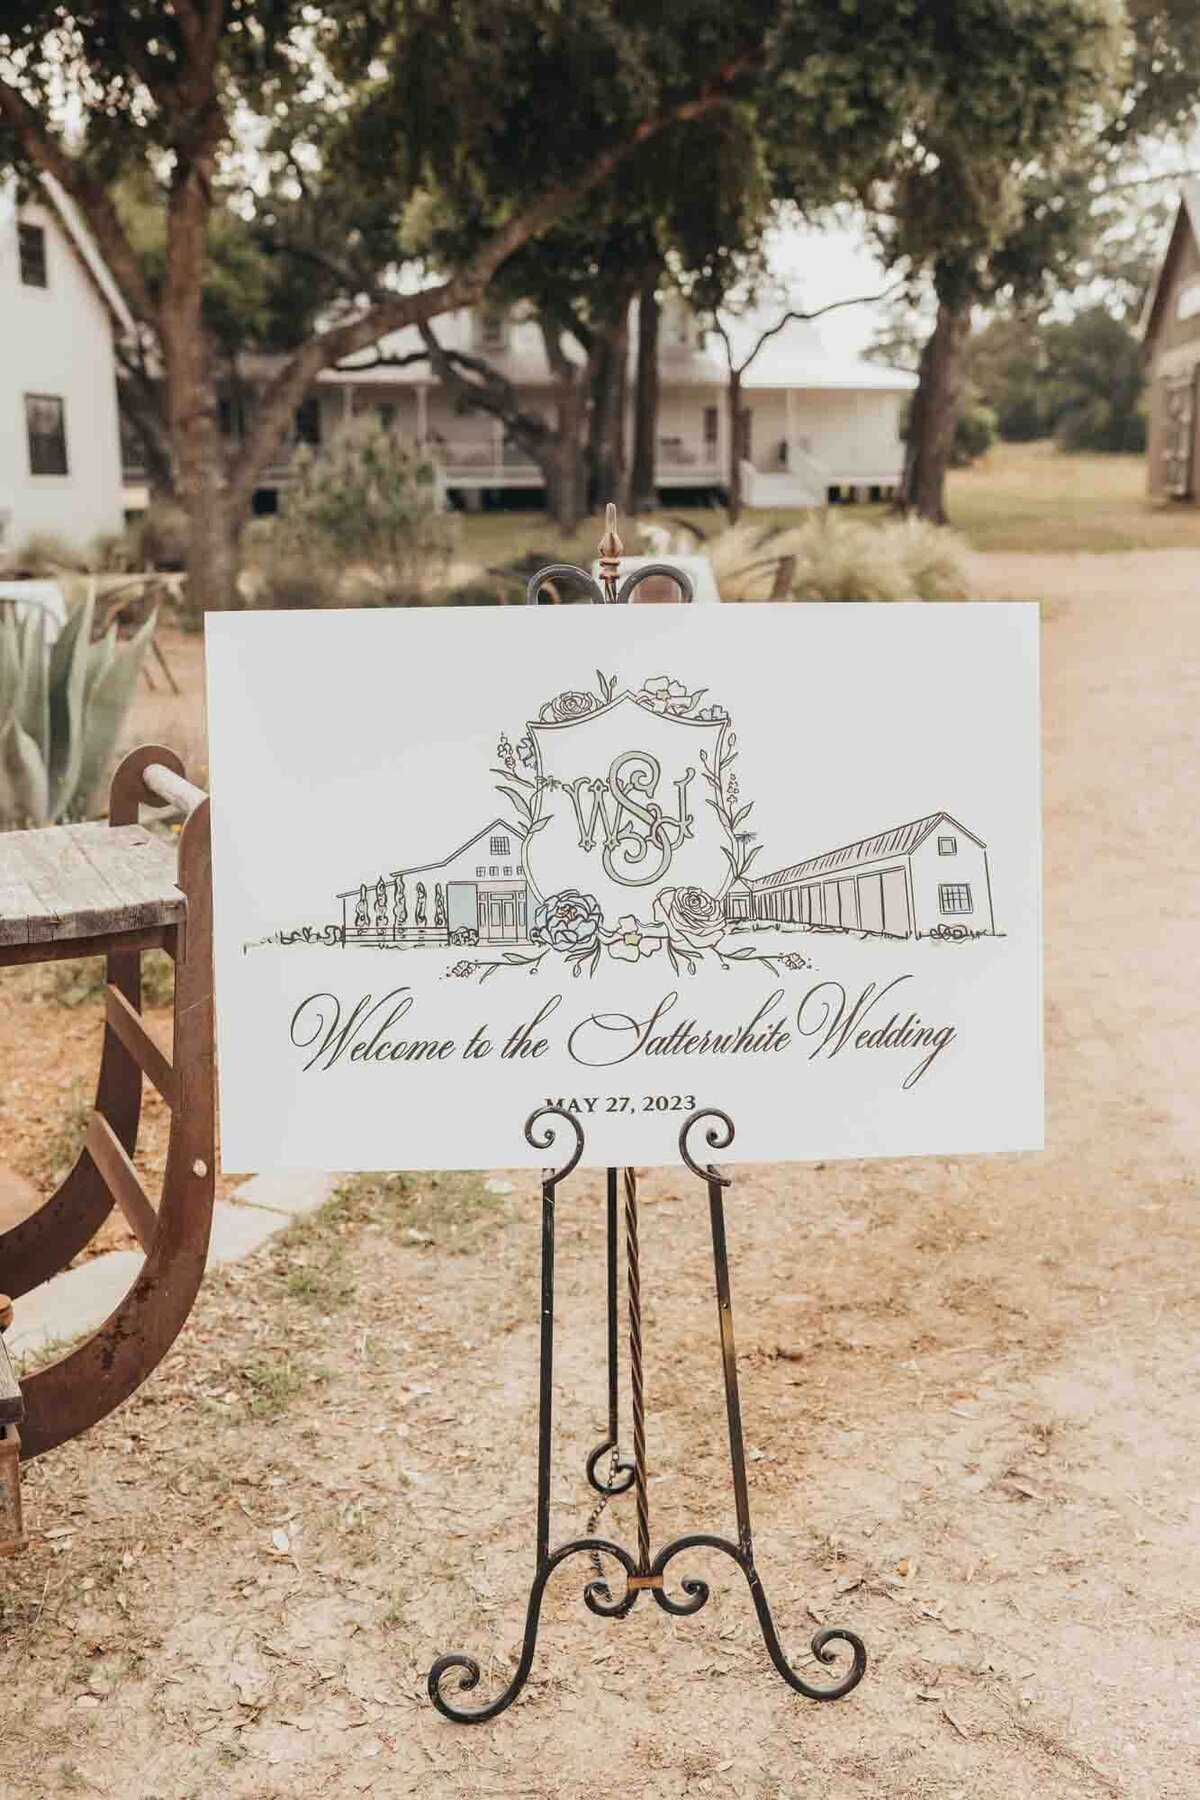 posterboard of drawing of the venue and couples name sits on an easel.